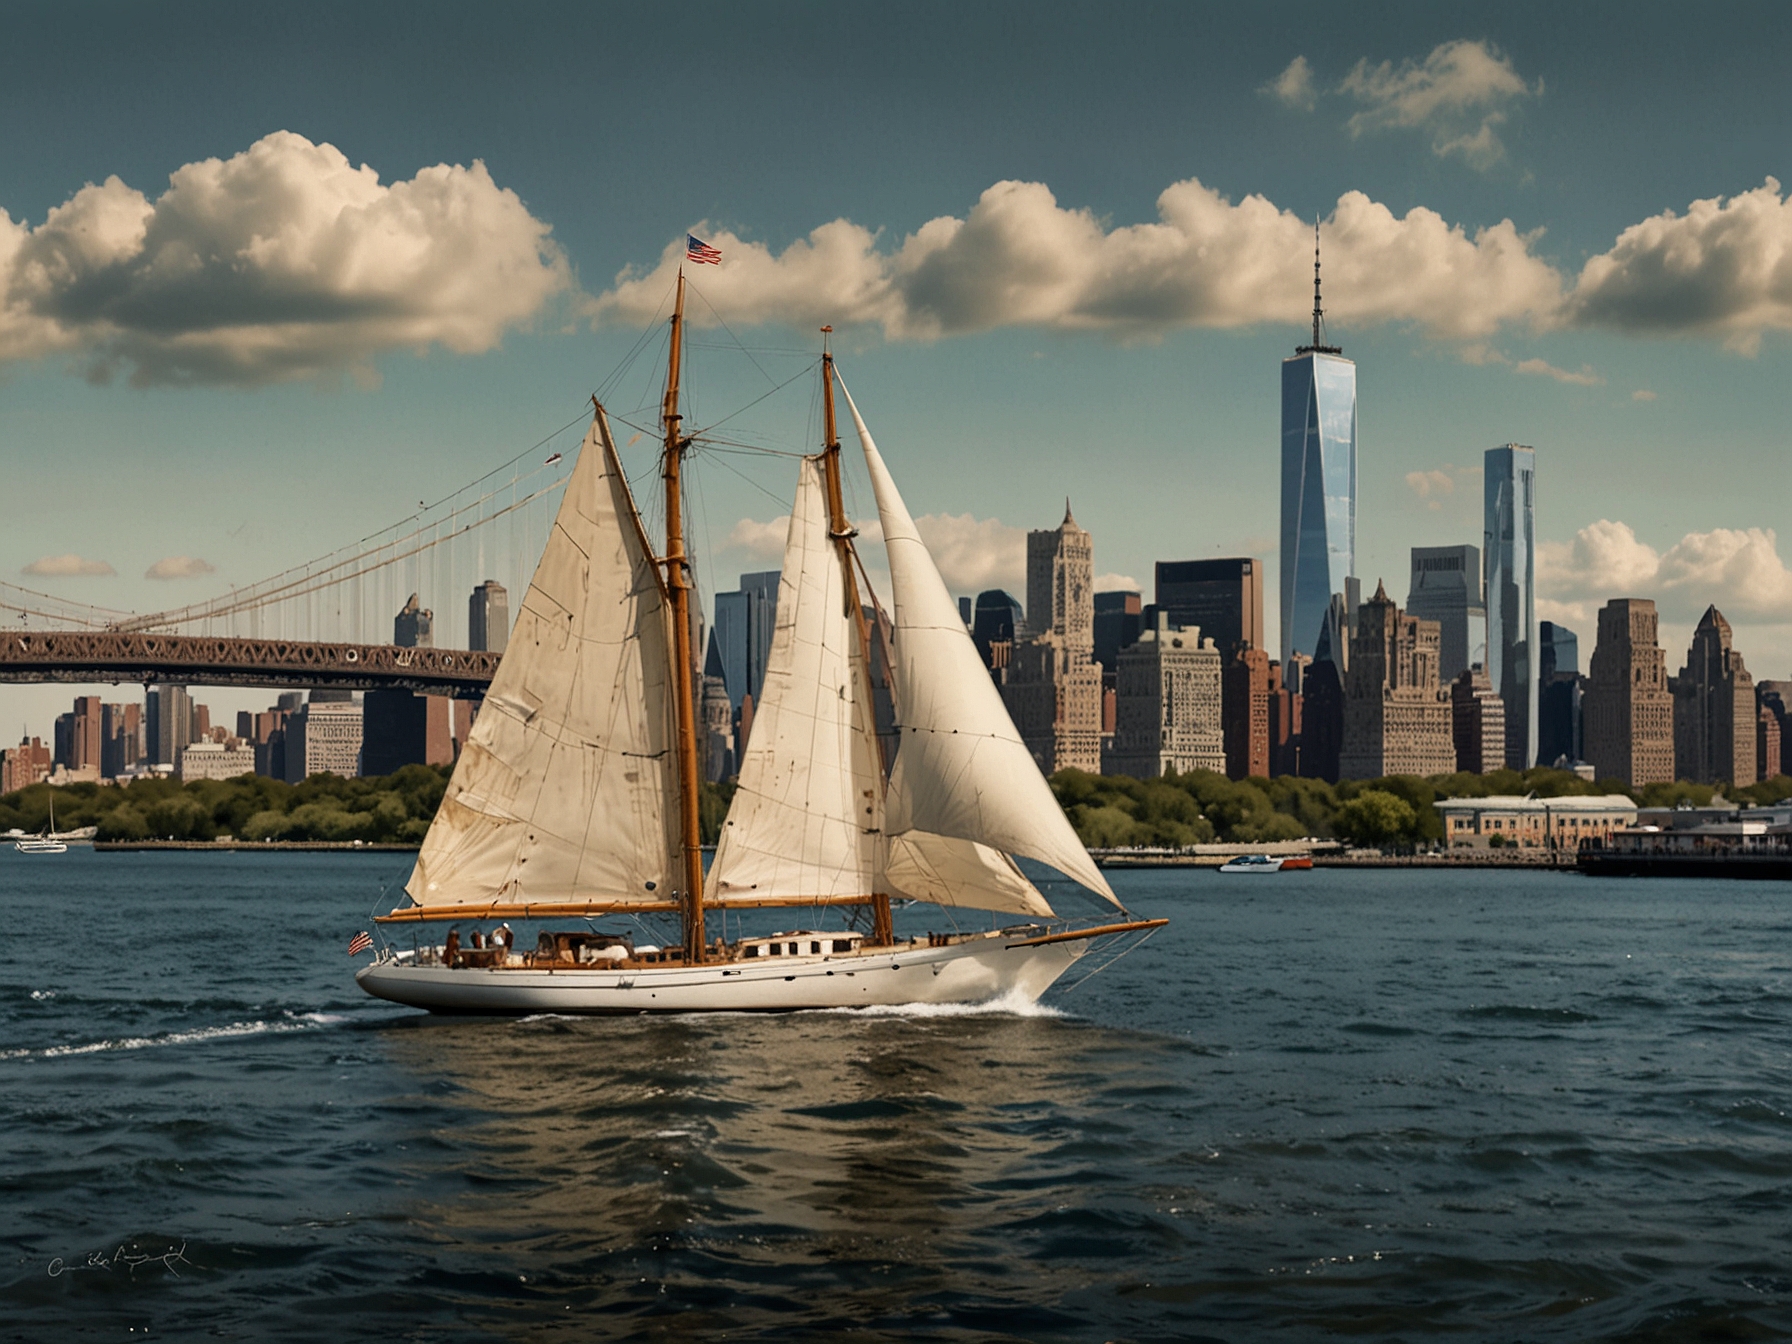 An elegant 70-foot antique sailboat glides across New York Harbor with the Manhattan skyline in the background, showcasing the luxurious Spring Sailing experience offered by The Mark Hotel.